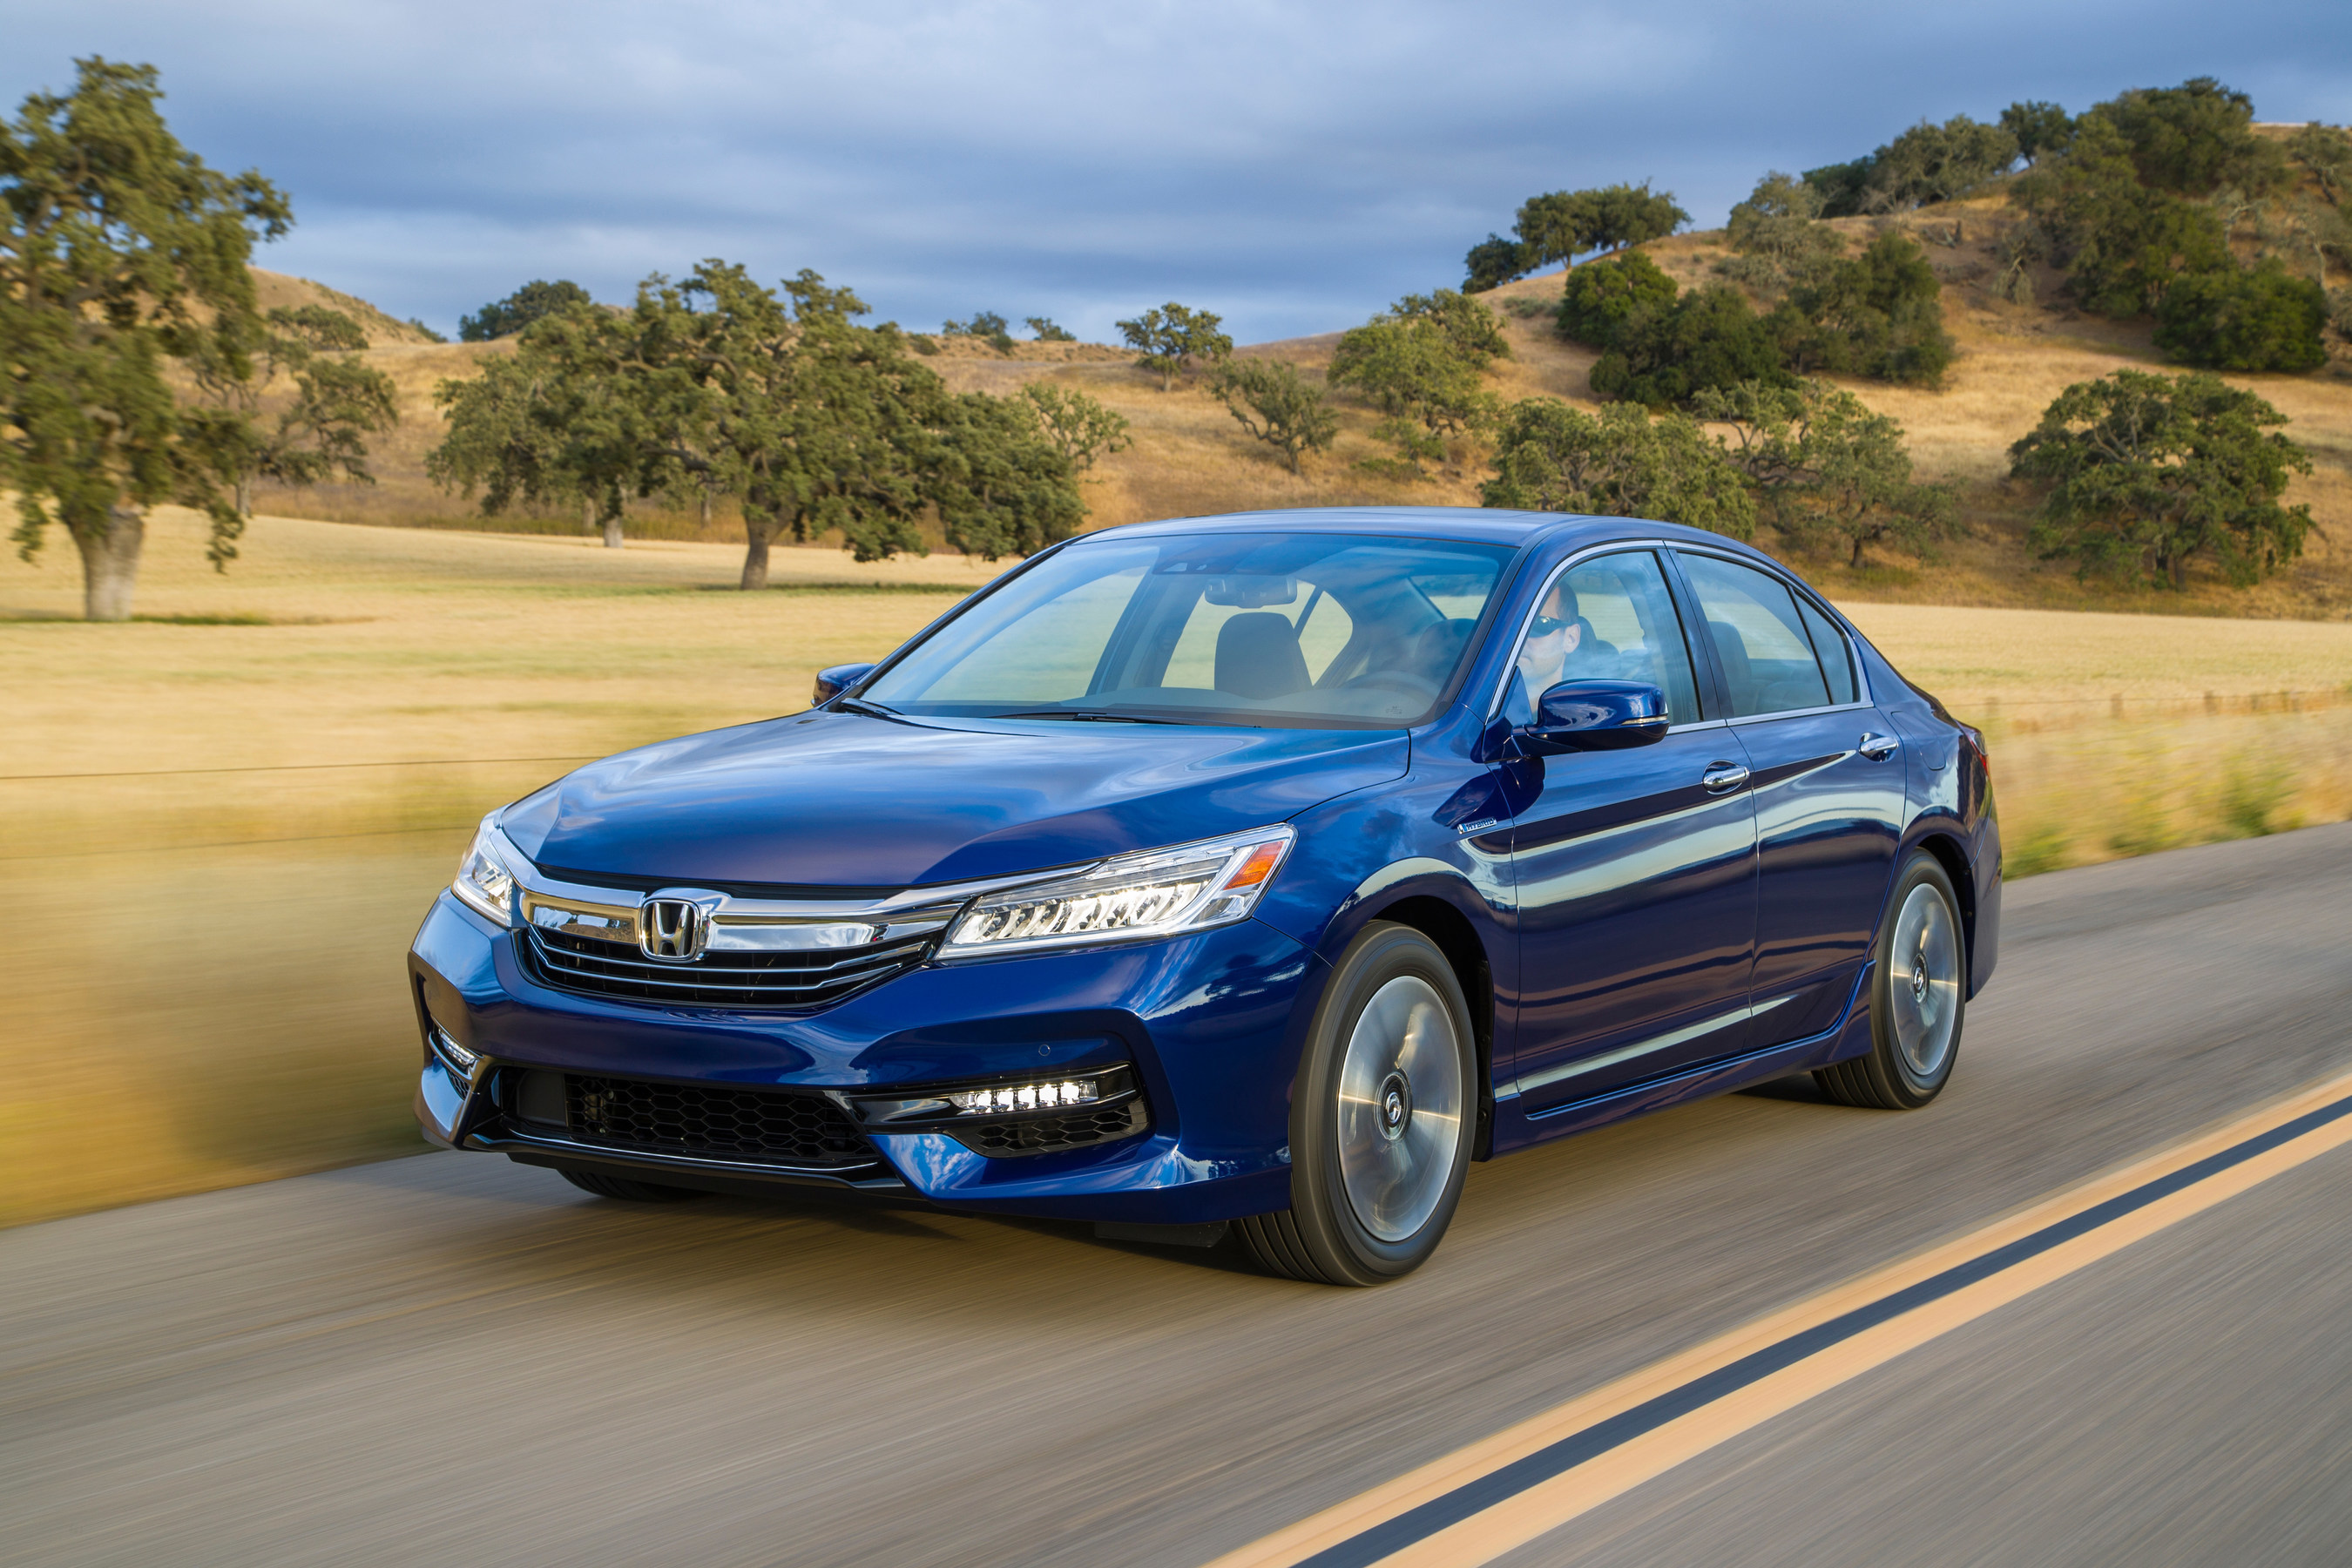 Honda Launches 2017 Accord Hybrid: America's Most Sophisticated, Powerful and Fuel Efficient Midsize Hybrid Sedan